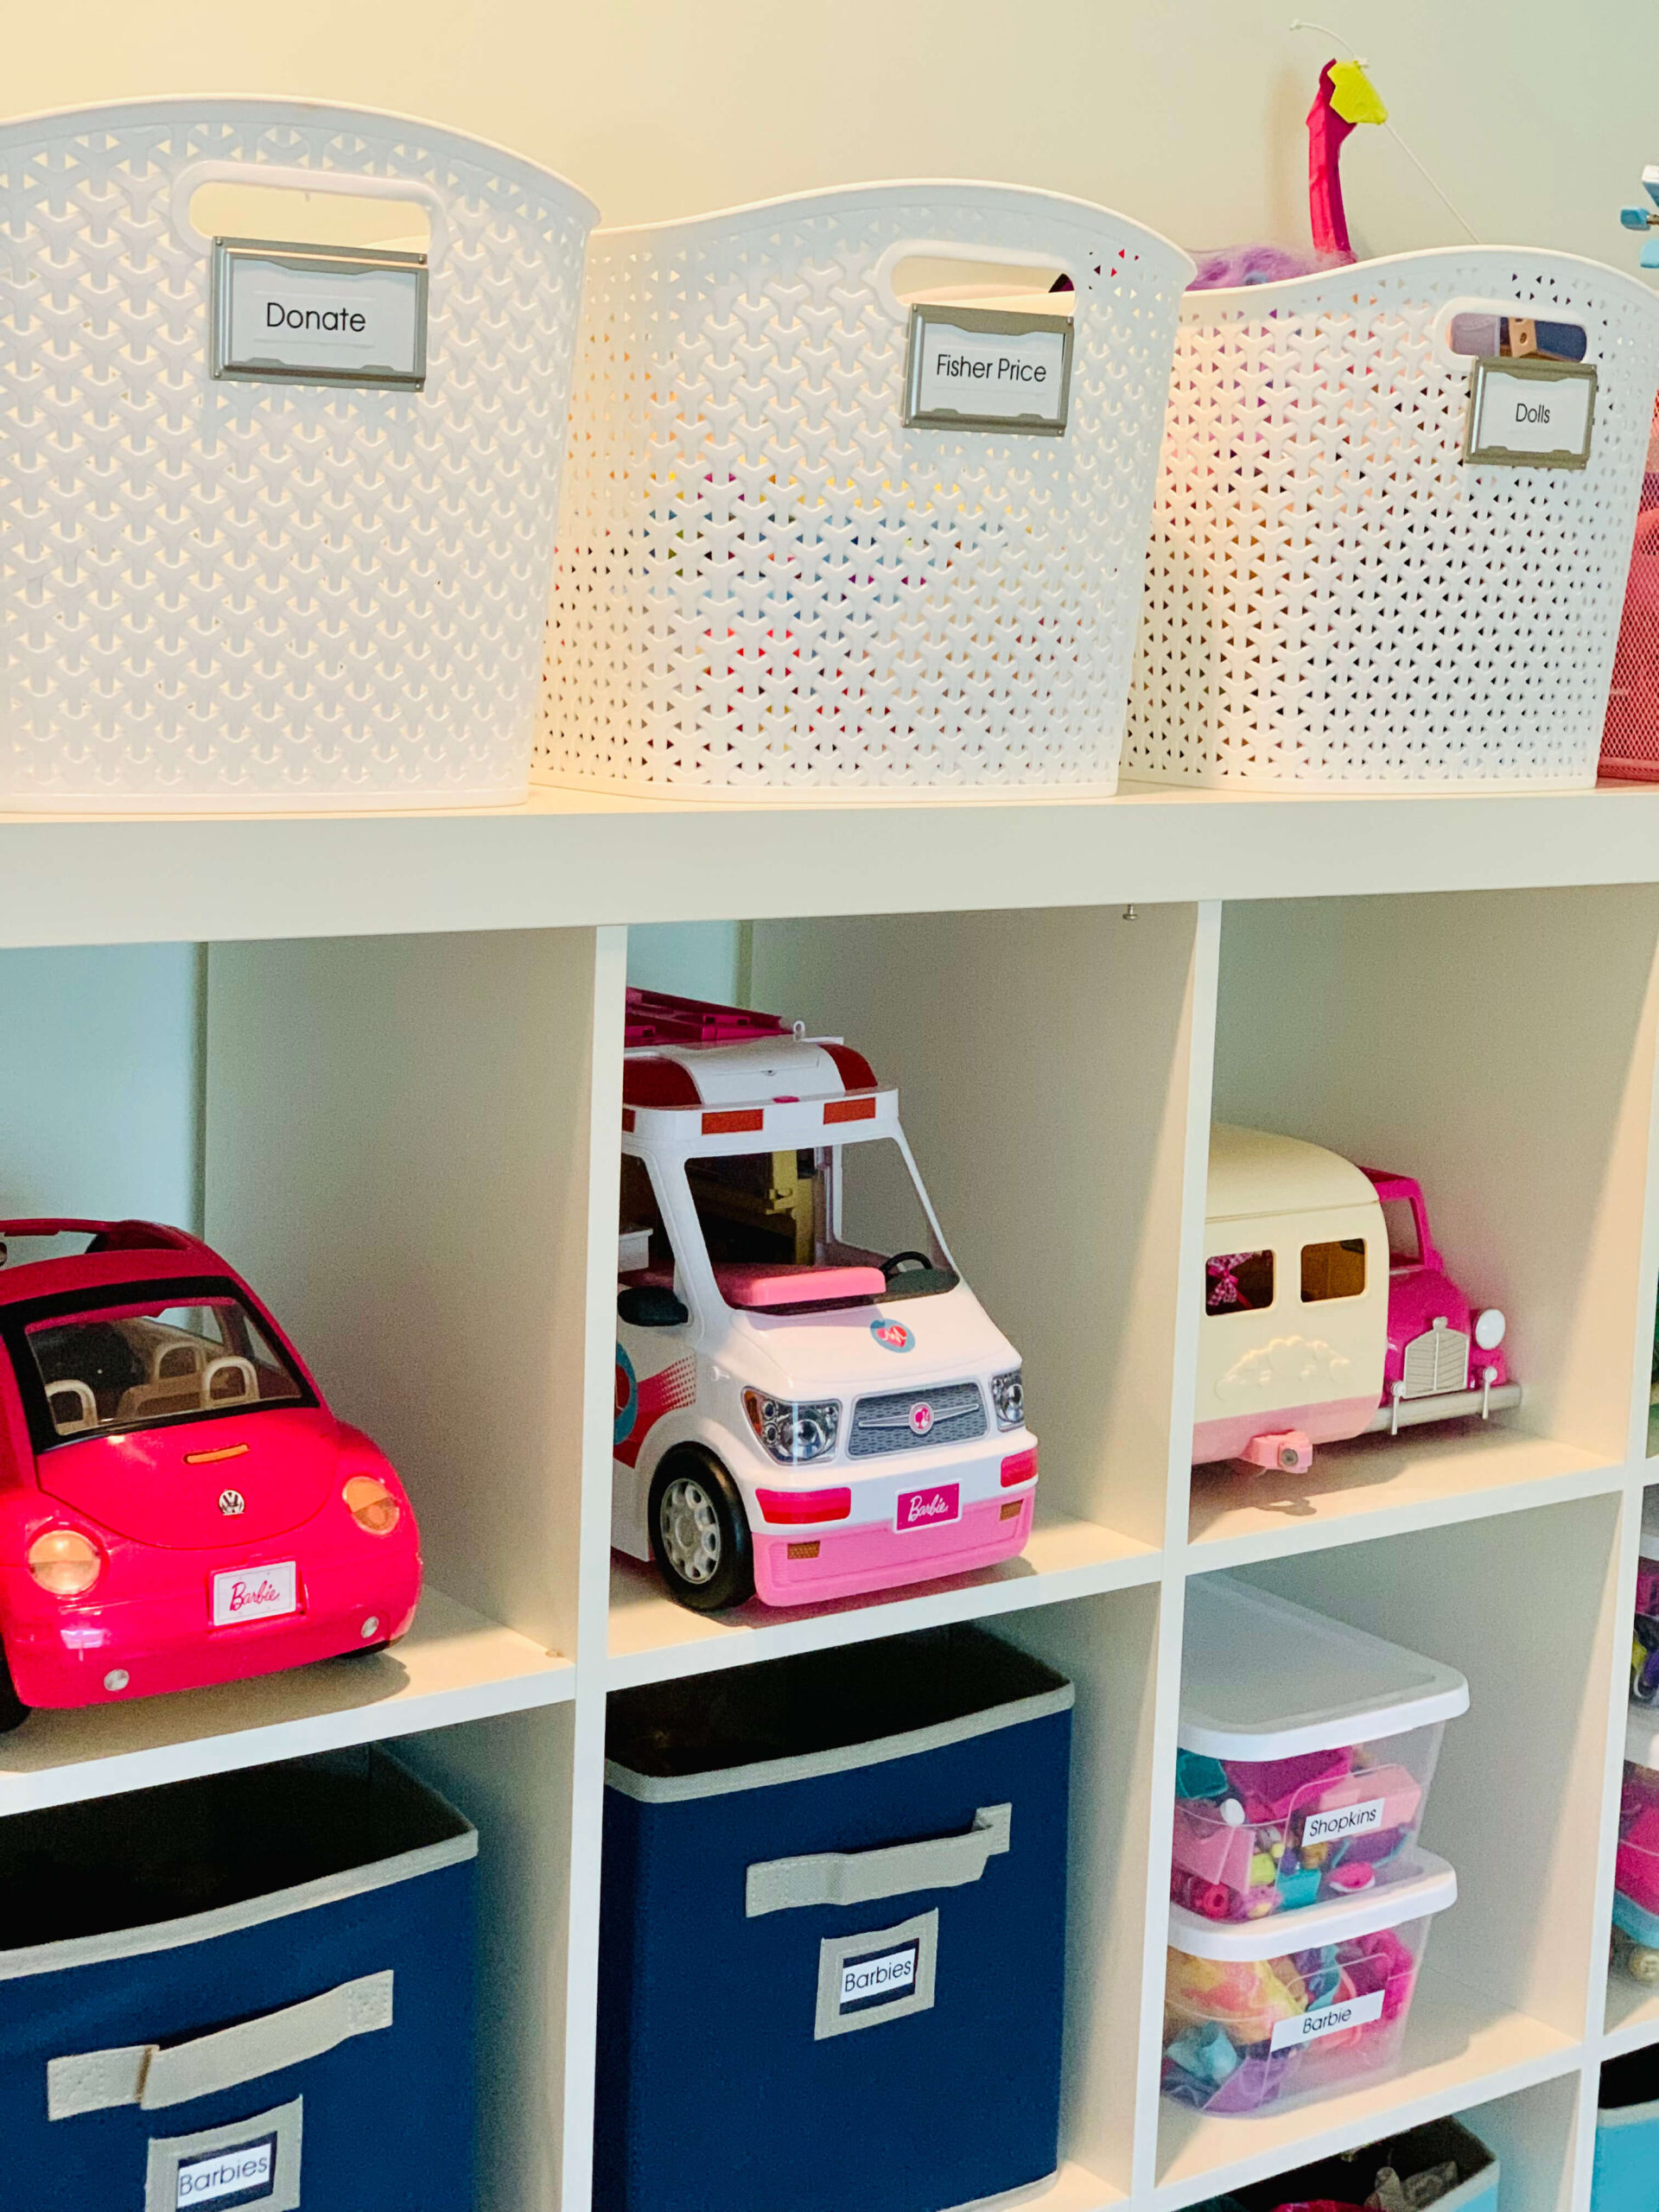 🚗 Car Organizing Tips with Kids You Need To Know